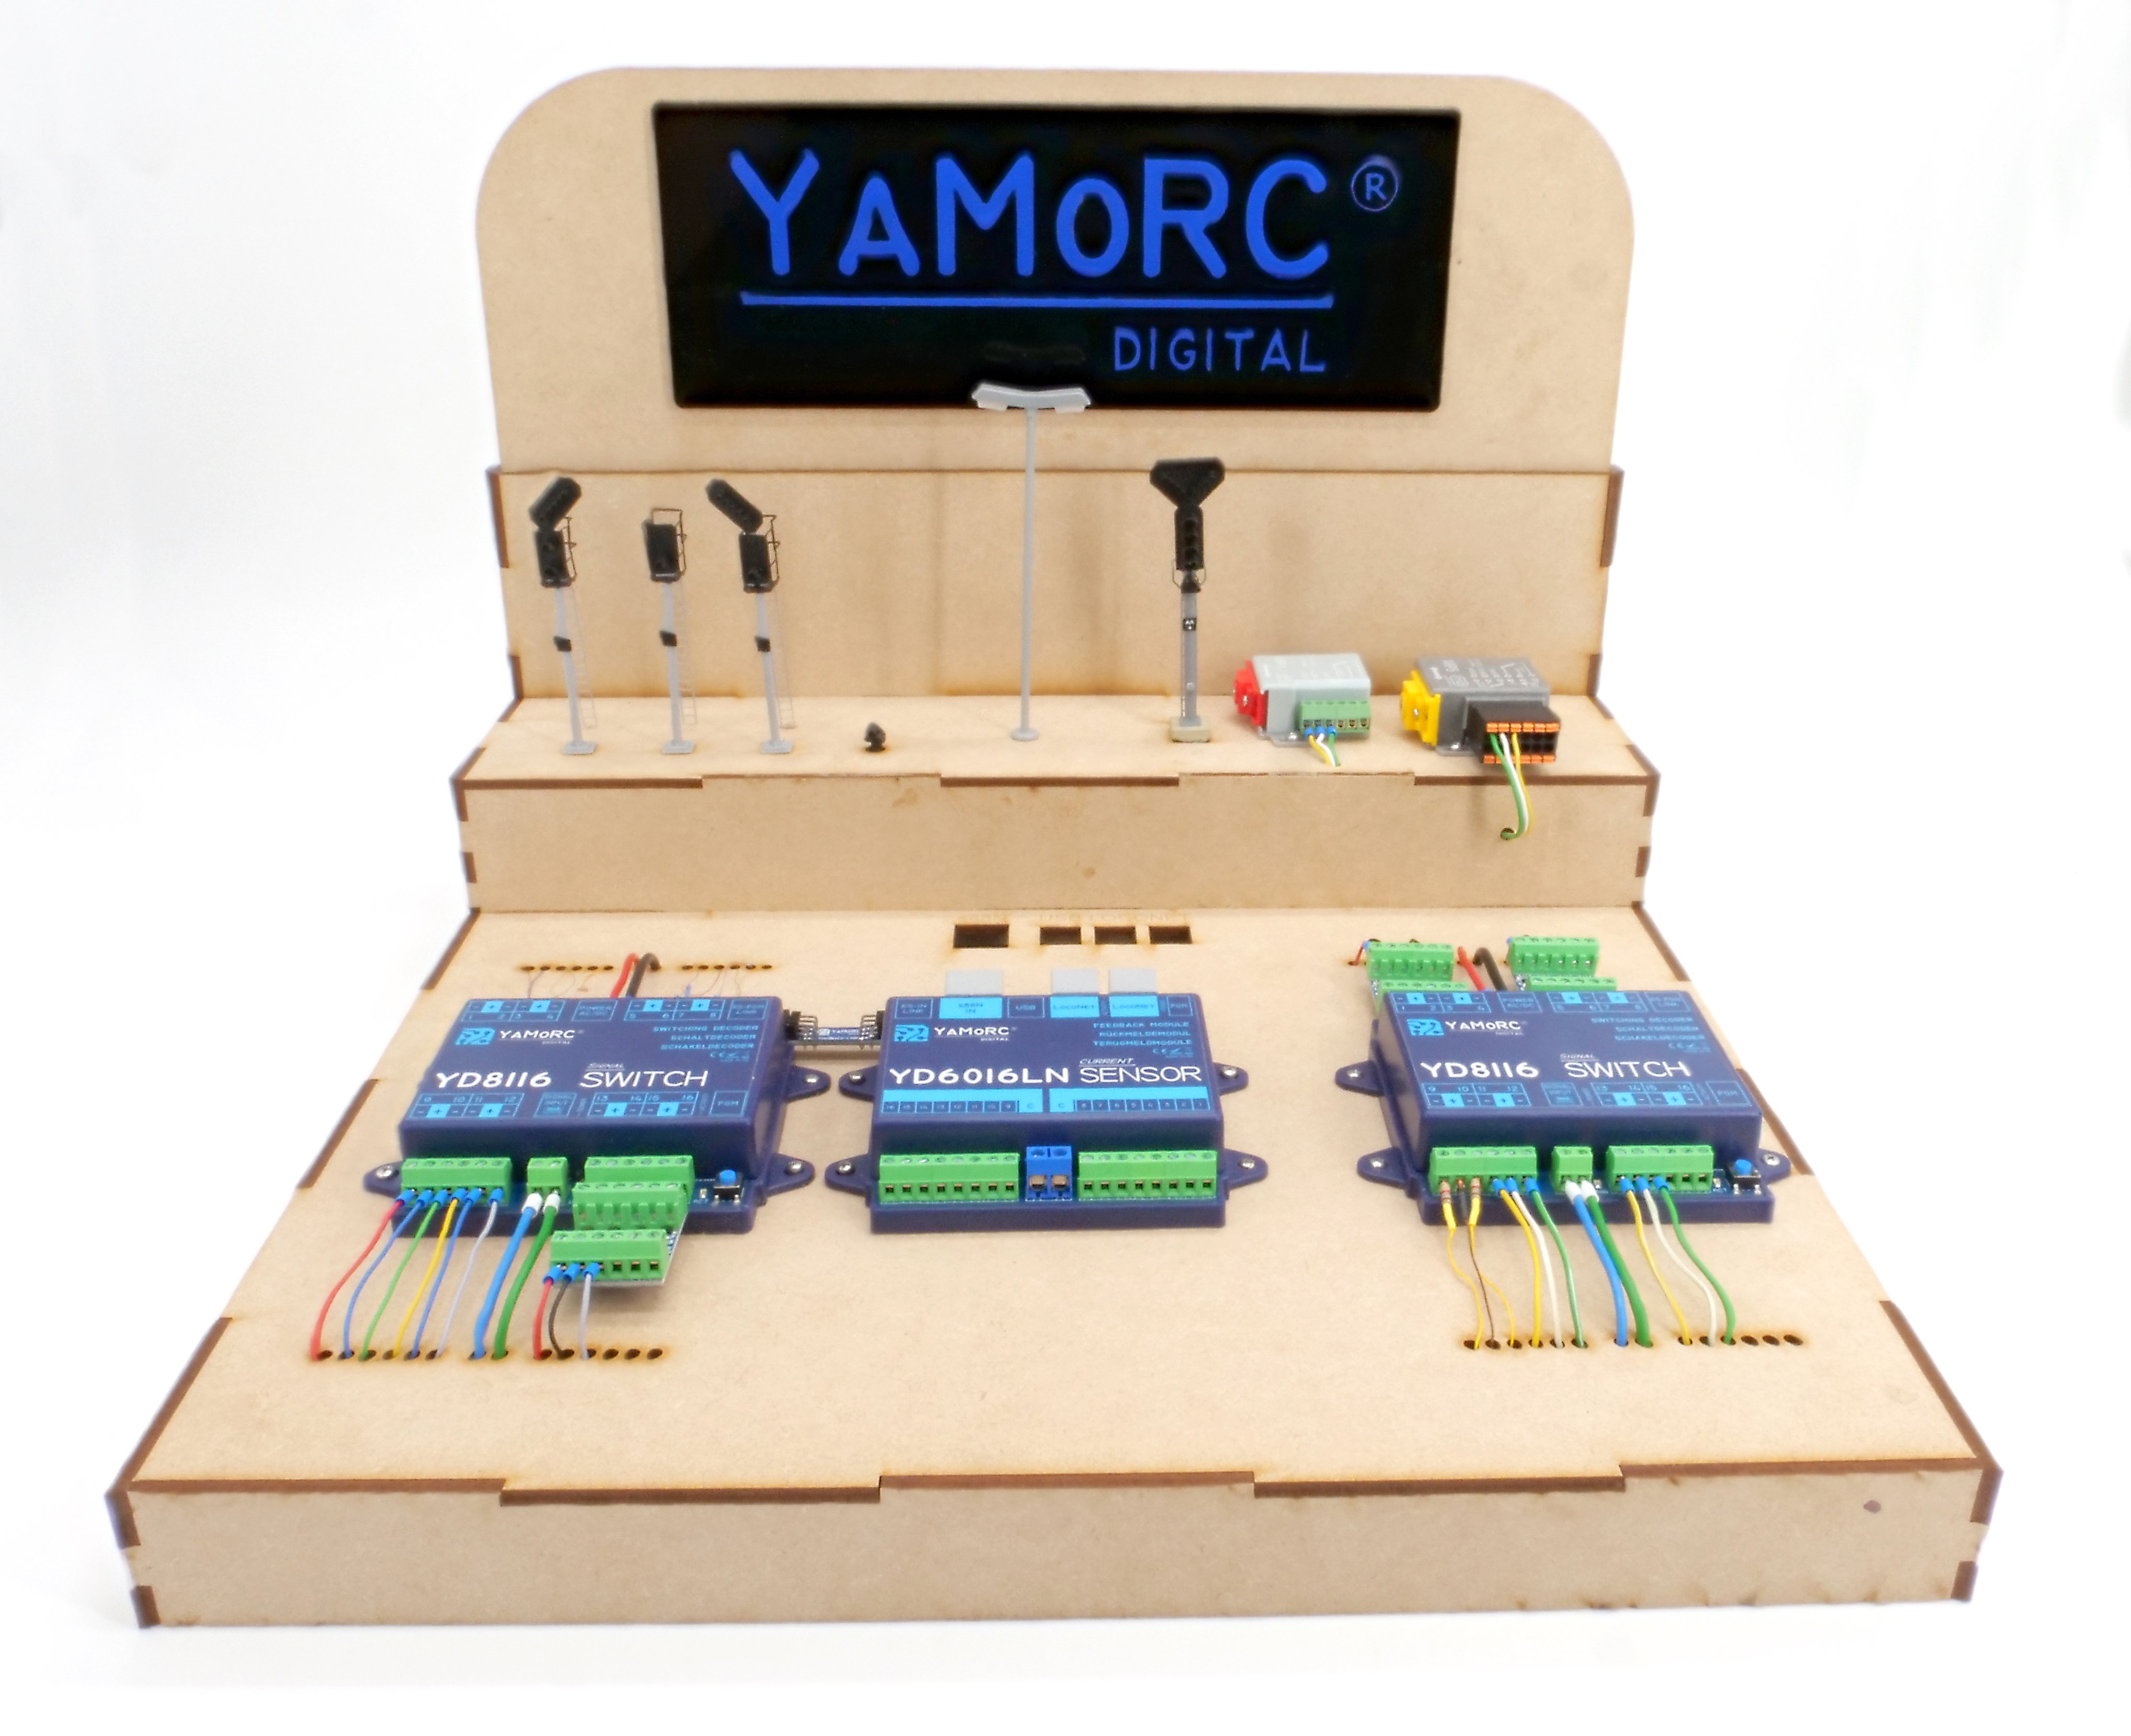 YaMoRC has introduced a selection of digital accessory decoders, including the YD8116 which will operate slow-start point motors, semaphore and colour light signals, station lamps and more.